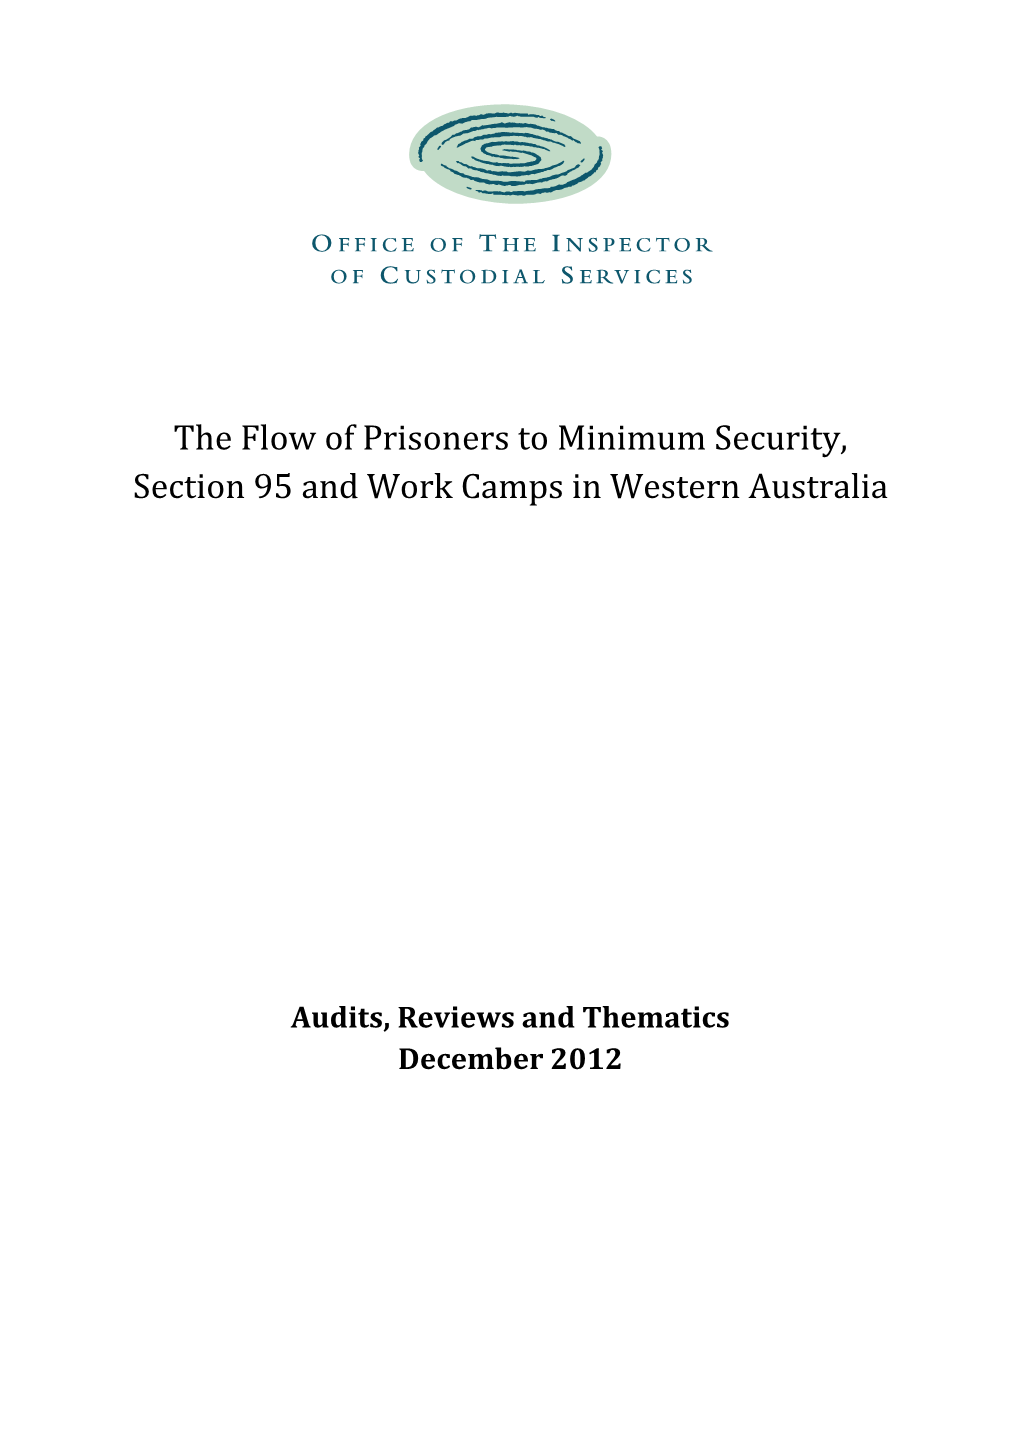 The Flow of Prisoners to Minimum Security, Section 95 and Work Camps in Western Australia